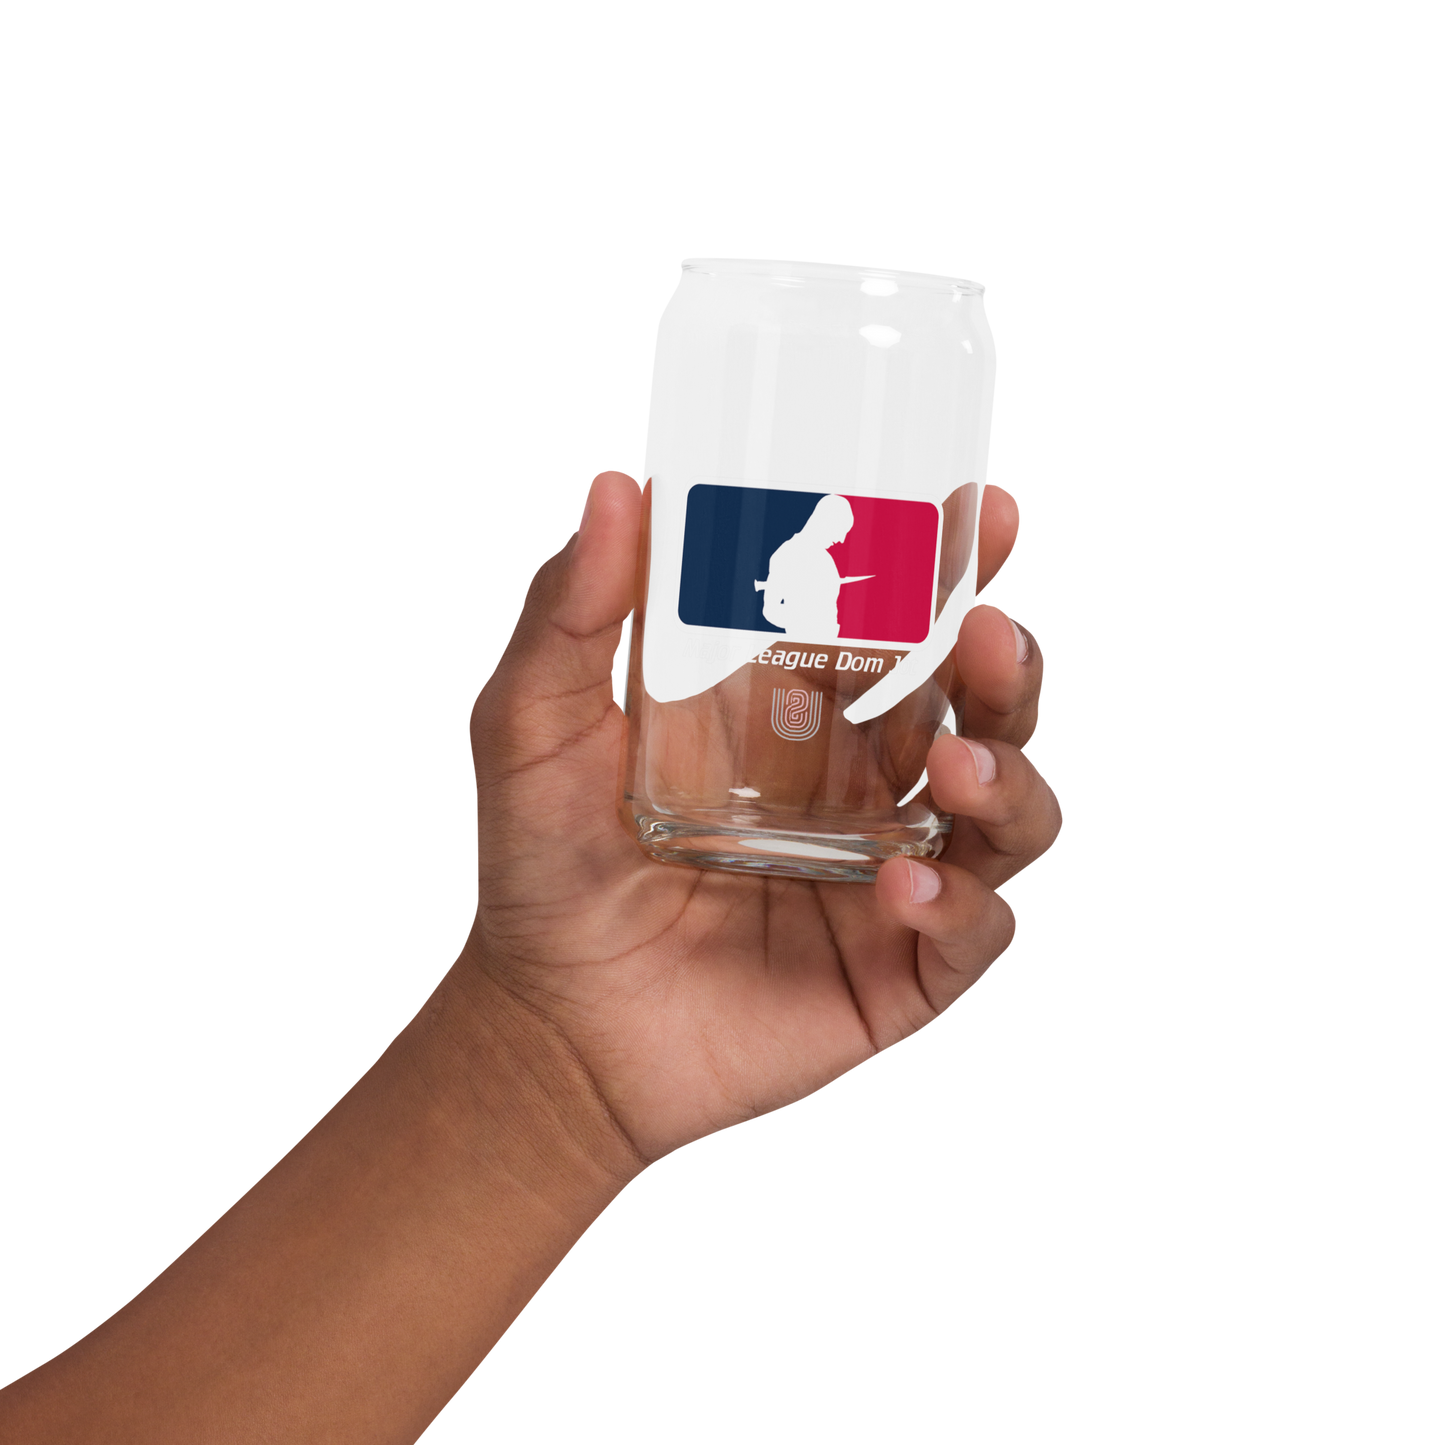 The Major League Dom Jot Beer Can Glass